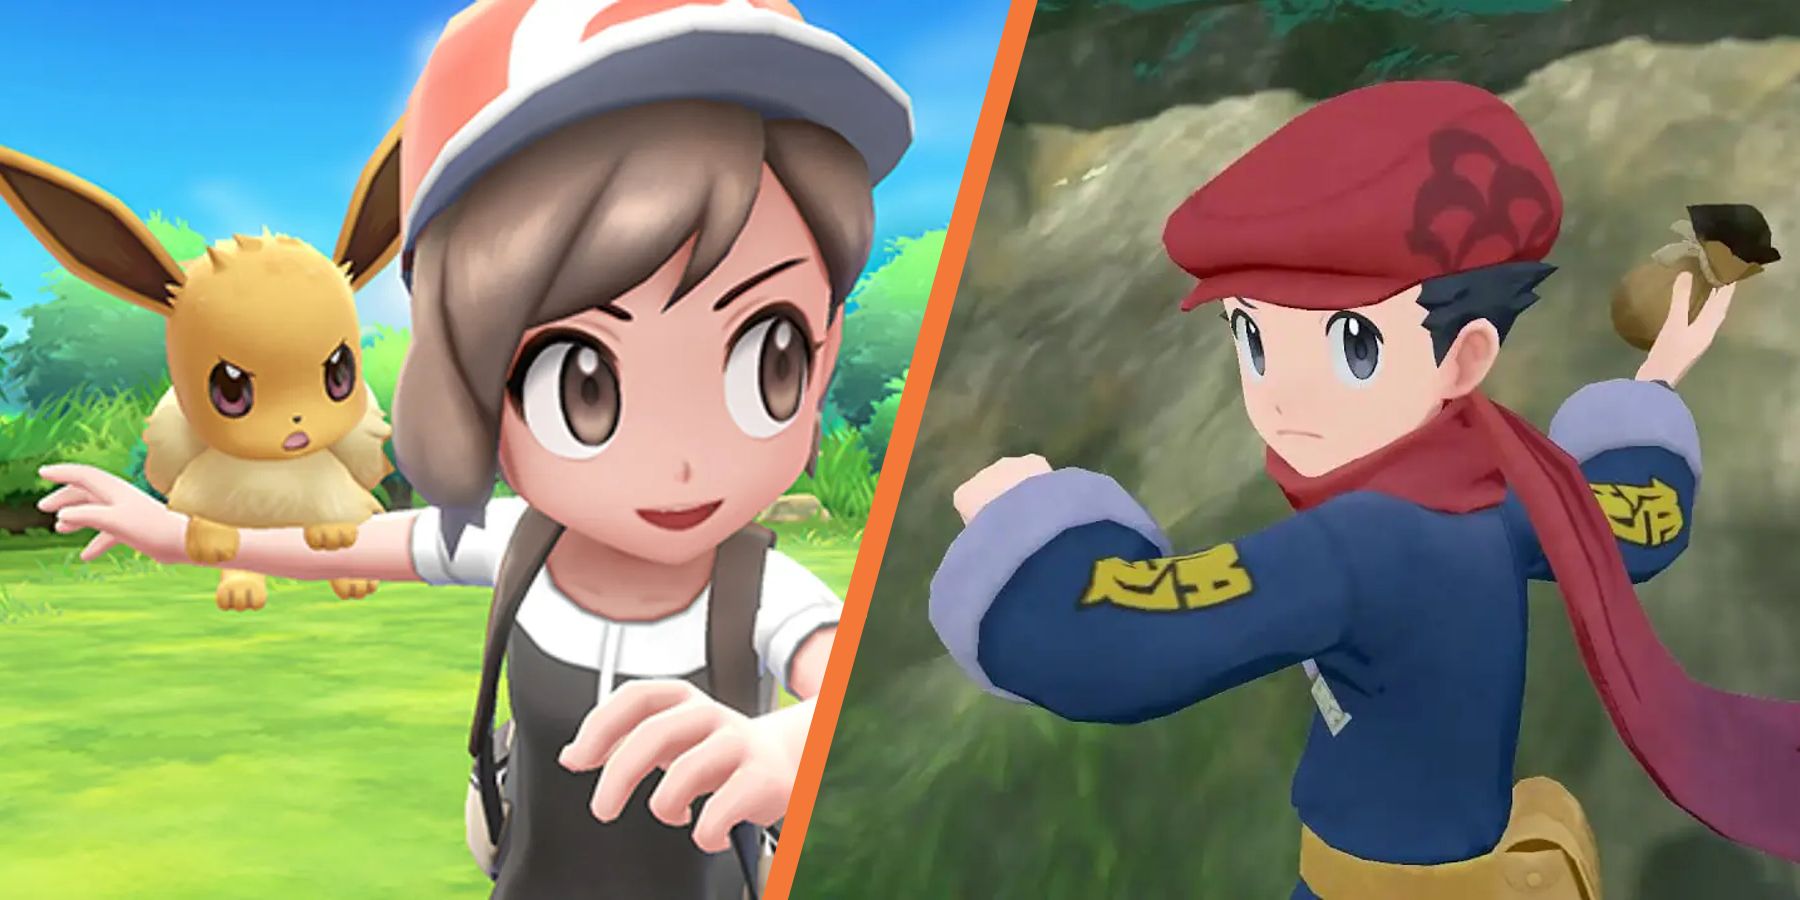 Side-by-side comparison of the trainers from Pokemon Let's Go Eevee and Legends: Arceus